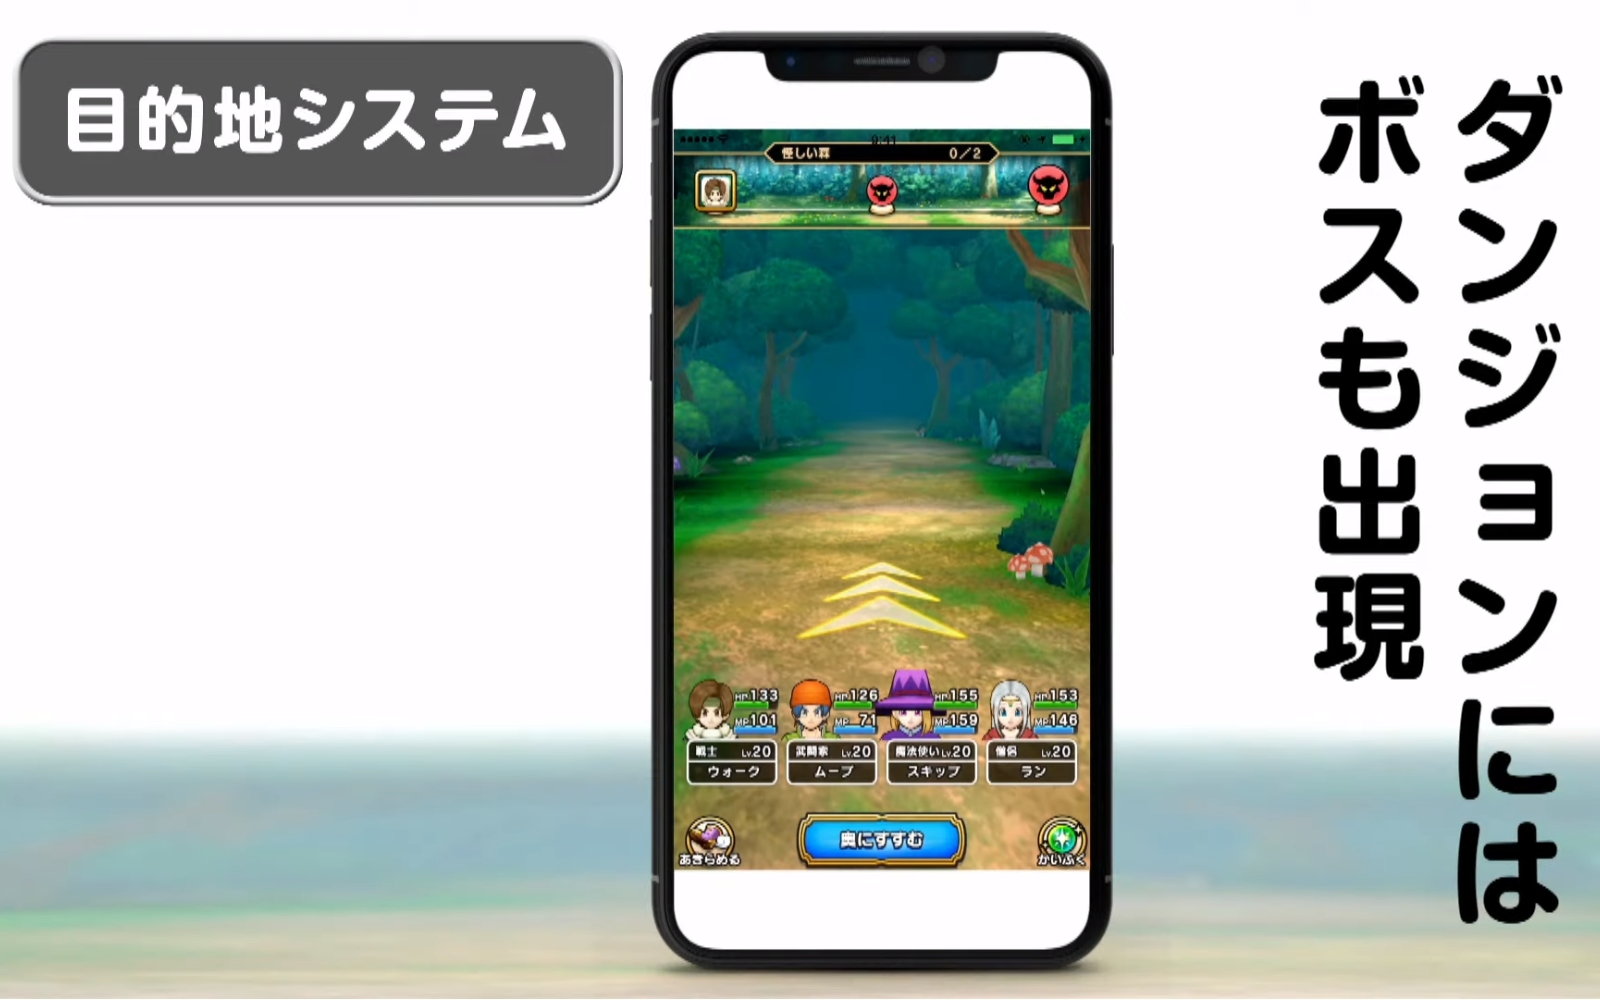 Dragon-Quest-Walk-Preview-Dungeon-AR-Game.jpg